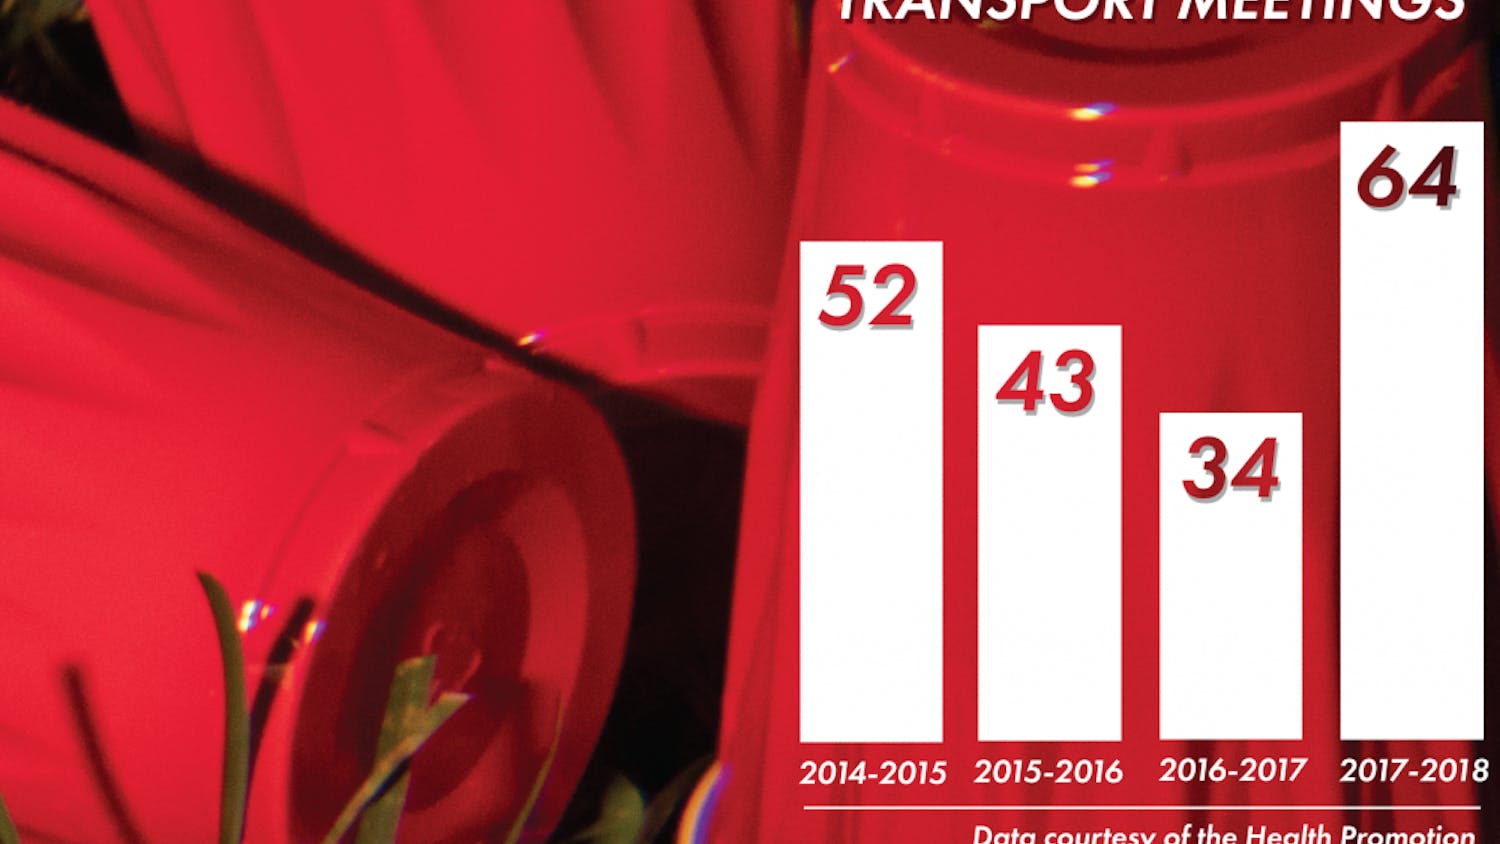 Transport/Alcohol Story Graphic